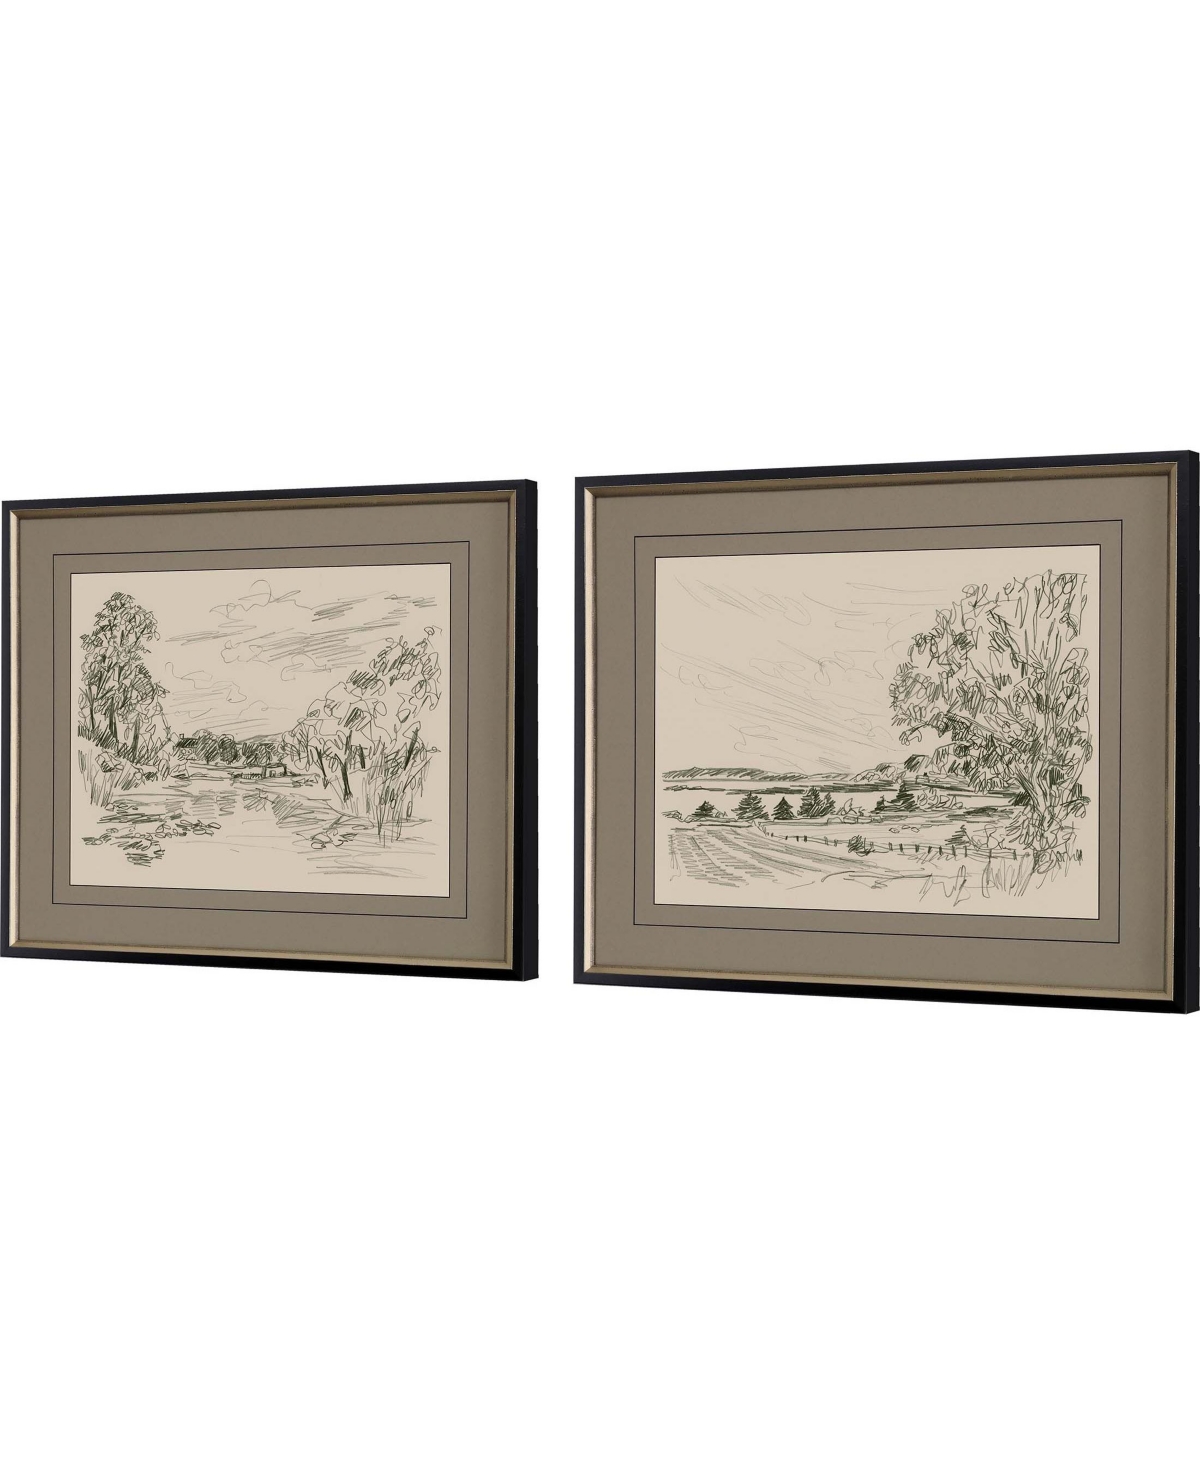 Shop Paragon Picture Gallery Sepia Scenes Ii Framed Art, Set Of 2